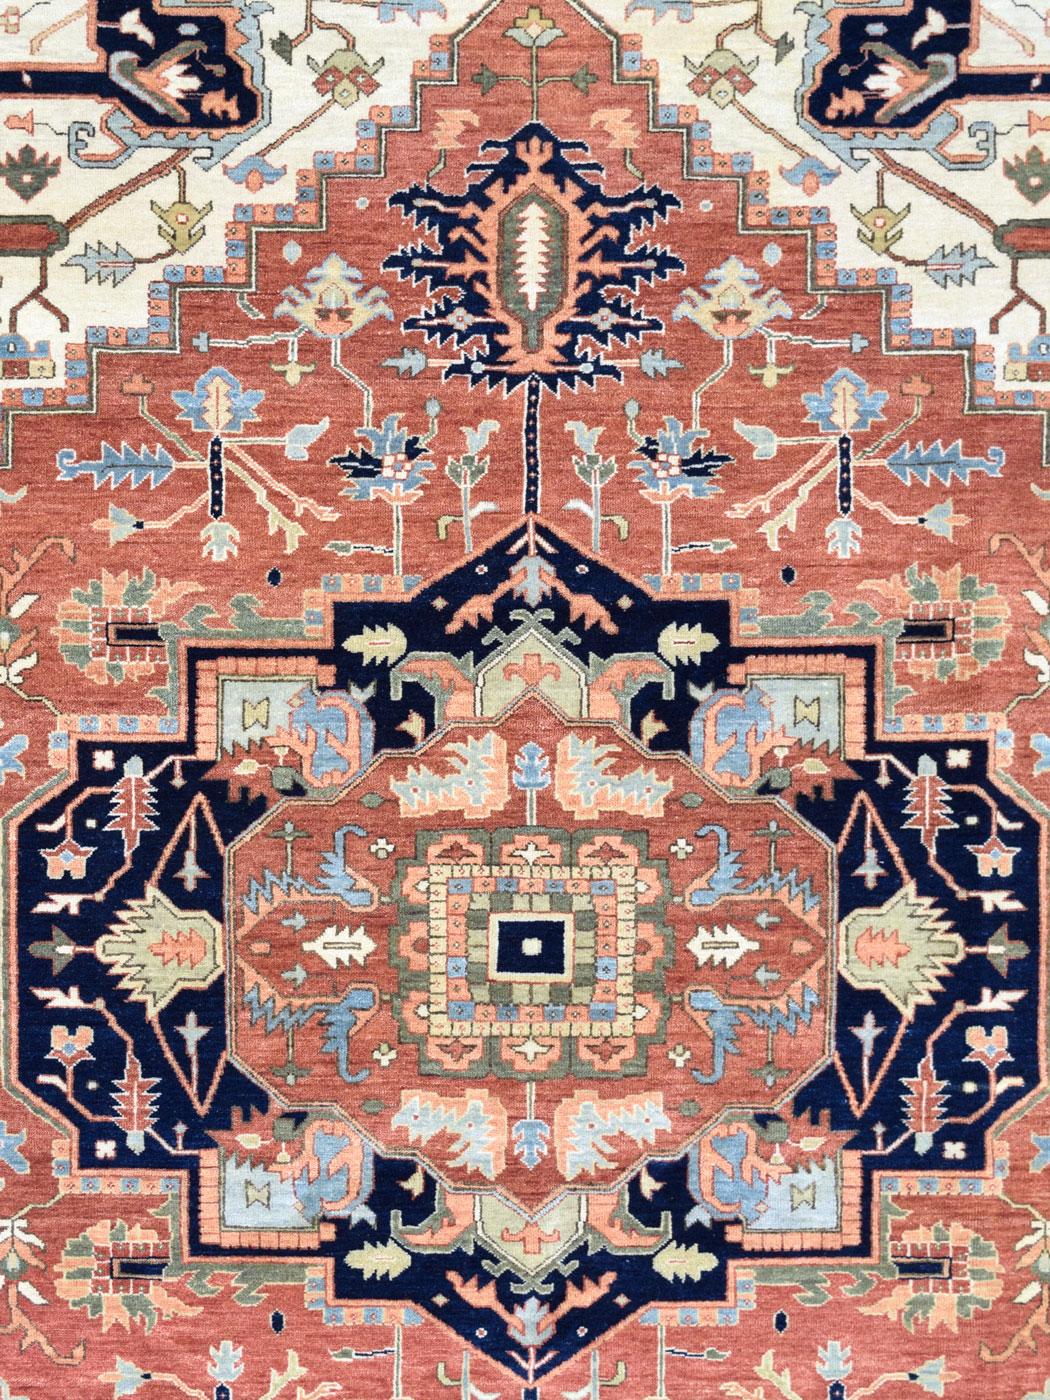 New and ready for generations of daily use, this Persian Serapi measures 5'11” x 8'9” and is hand-knotted in pure wool. Inspired by the classic Serapi carpets woven in Iran, this piece features a hand-knotted pile and an organically dyed color